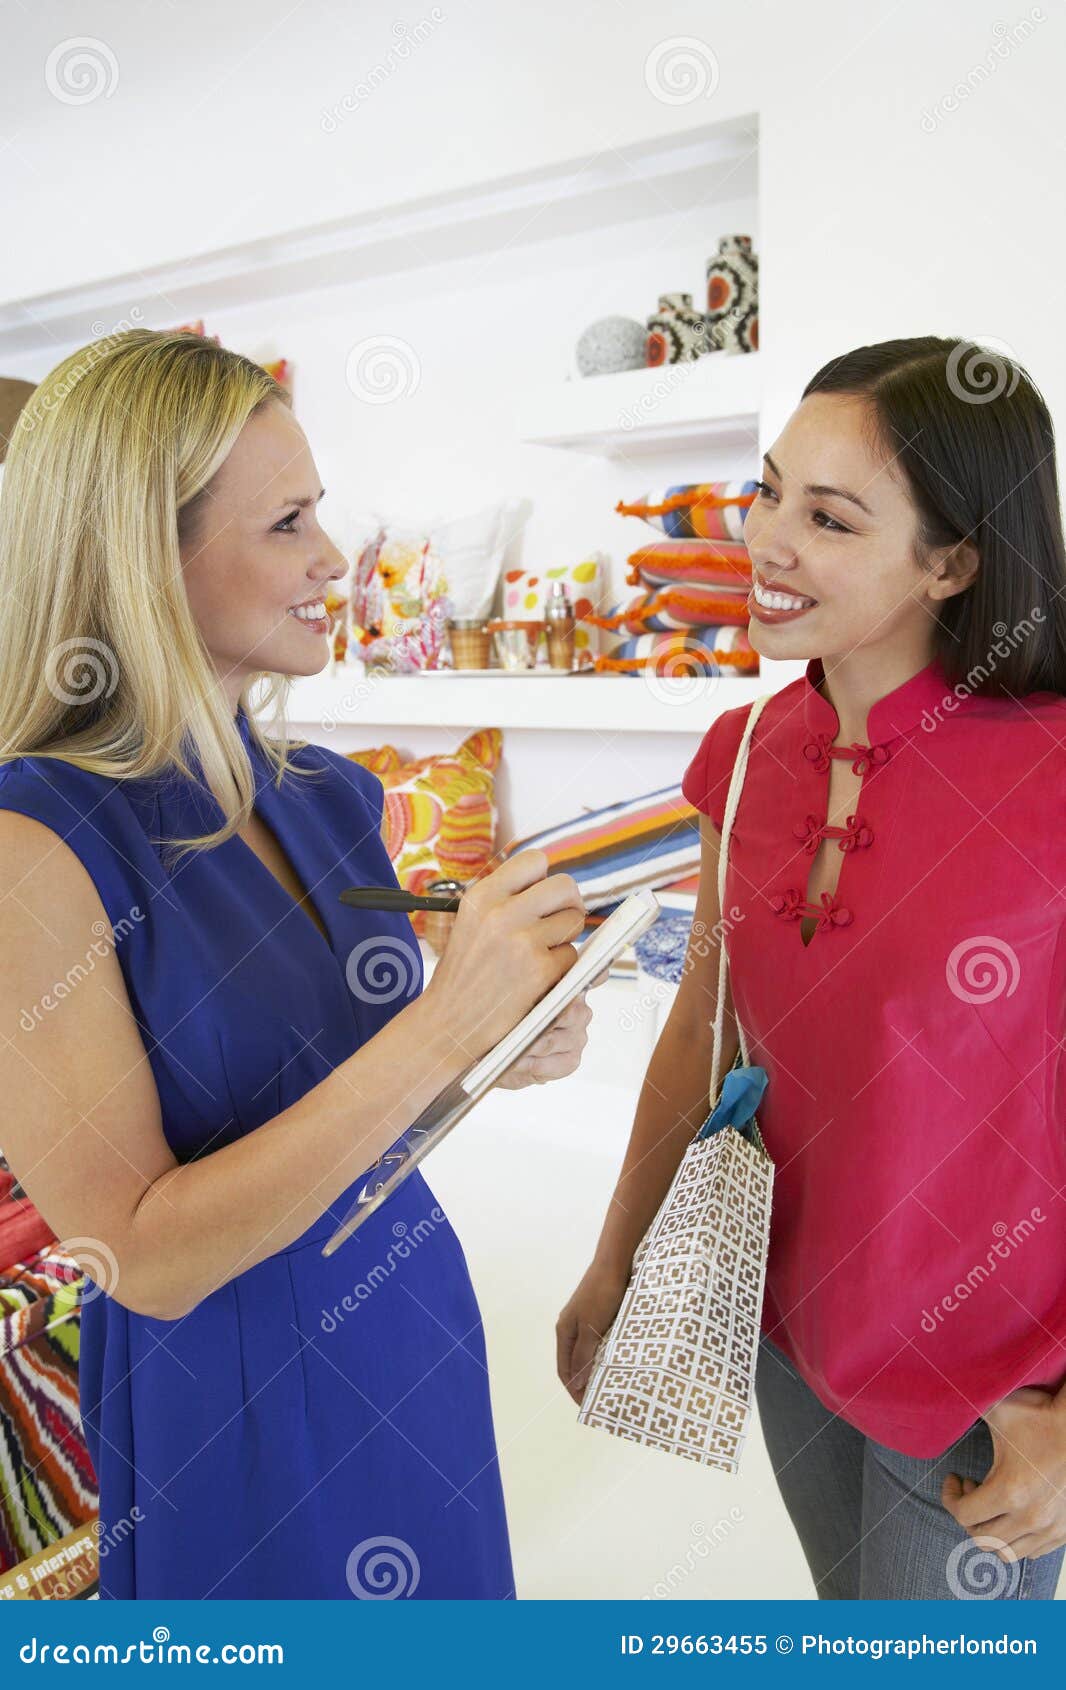 saleswoman communicating with female customer in store